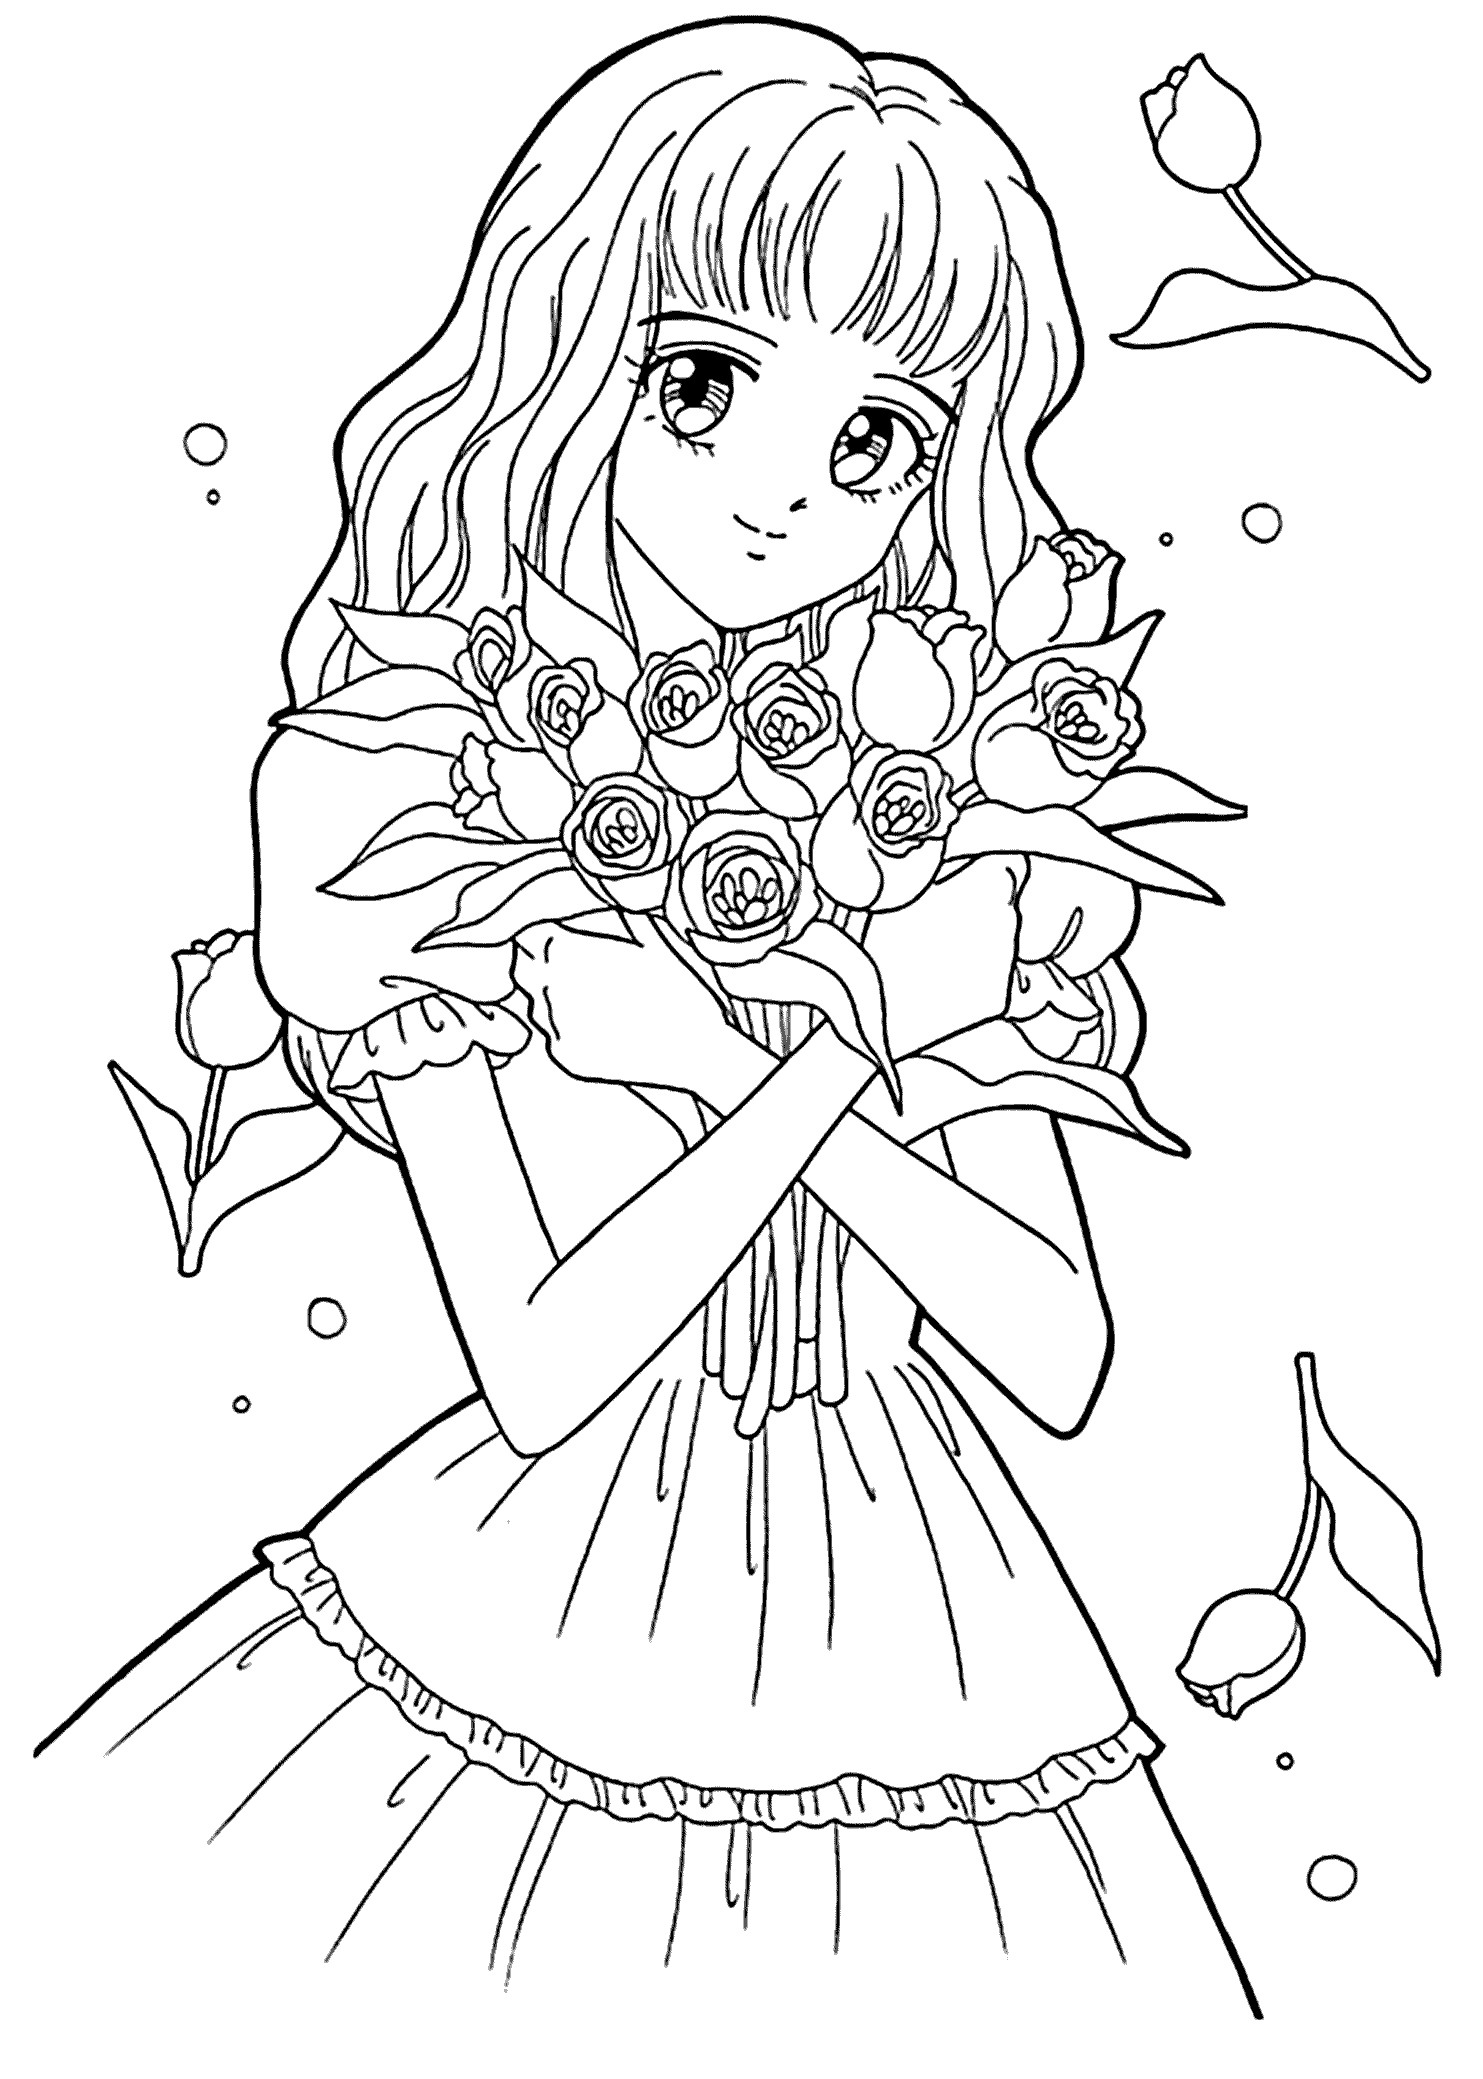 Cute Empty Coloring Pages For Teens
 Best Free Printable Coloring Pages for Kids and Teens